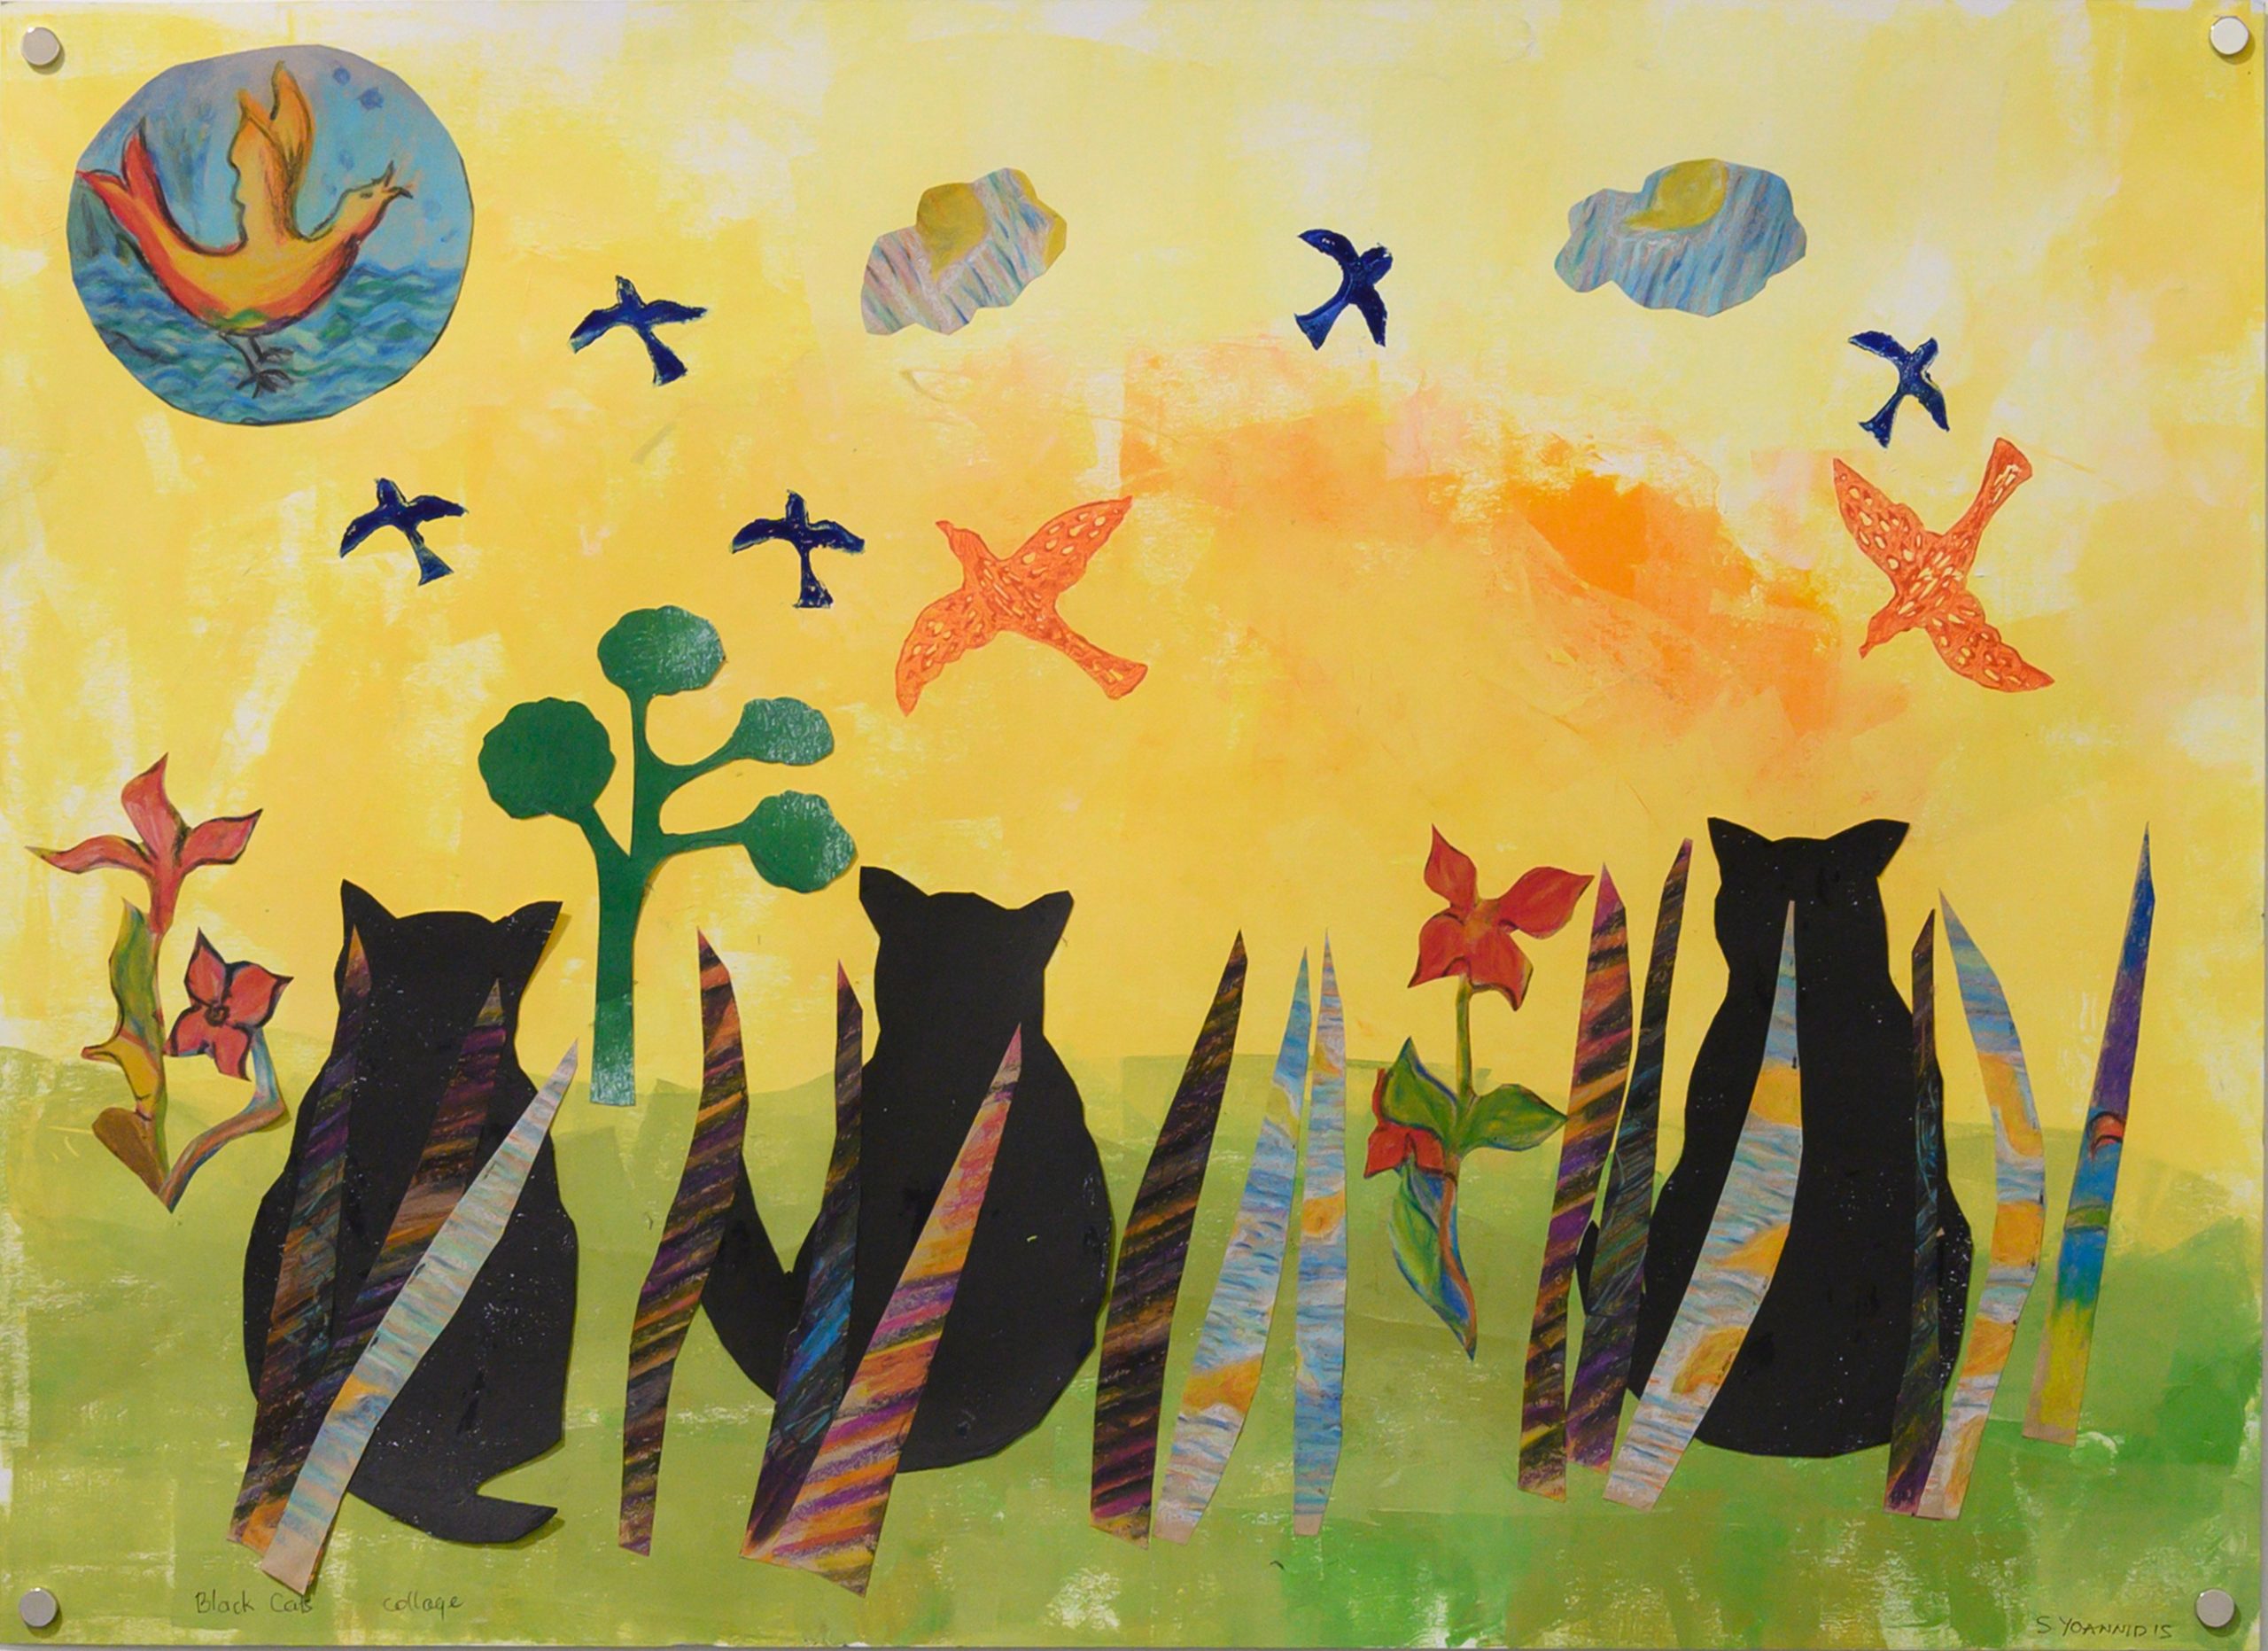 Unframed artwork by Stephanie Yoannidis of a colourful collage featuring 3 black cats sitting in green grass watching birds in the sky